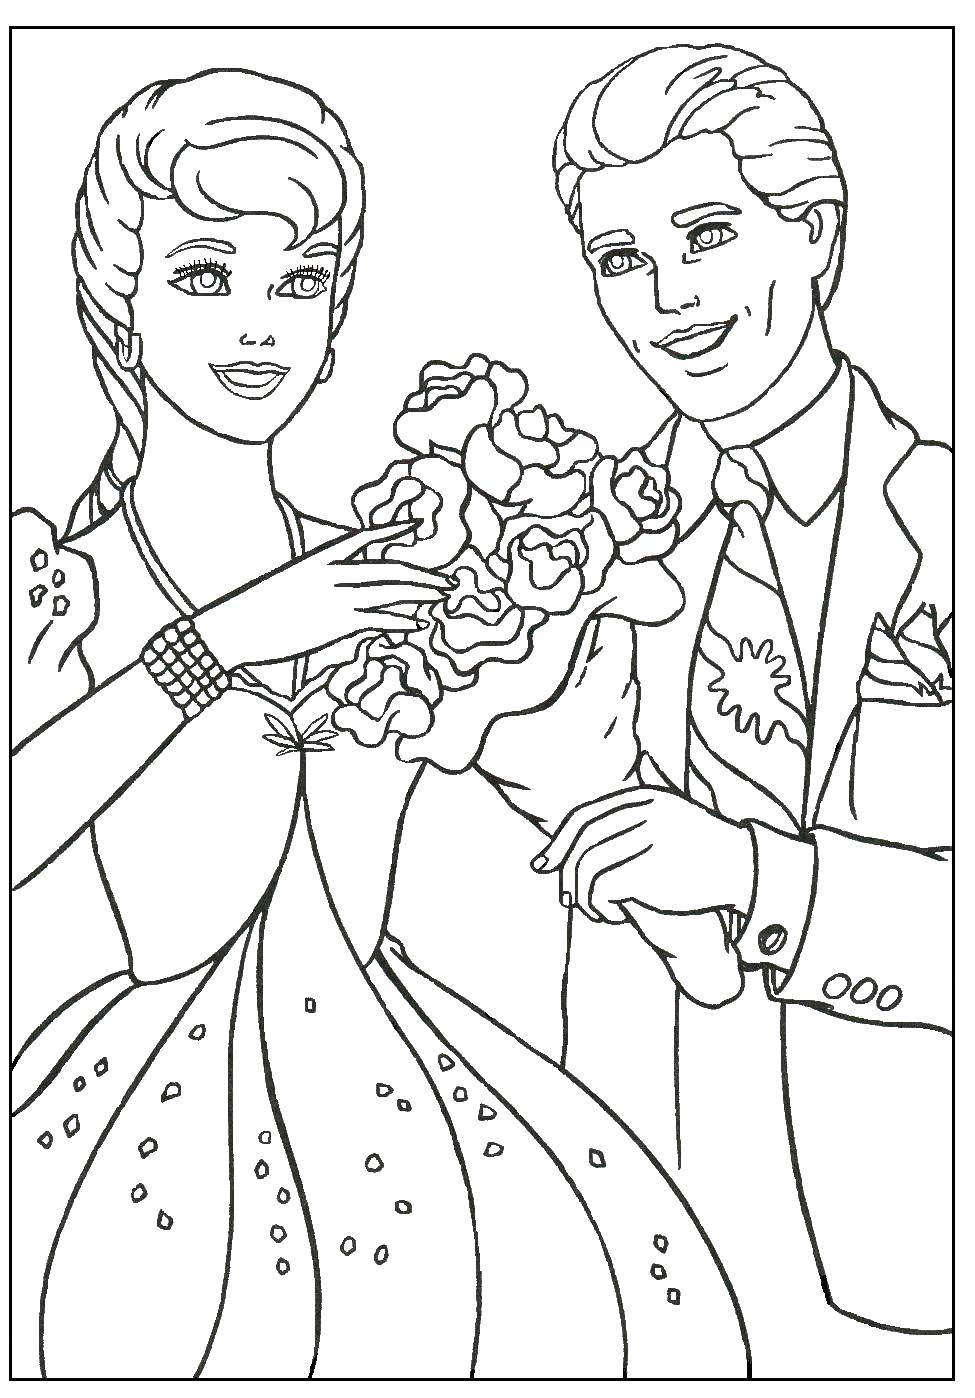 Coloring Barbie and her husband. Category wedding. Tags:  Wedding, dress, bride, groom.